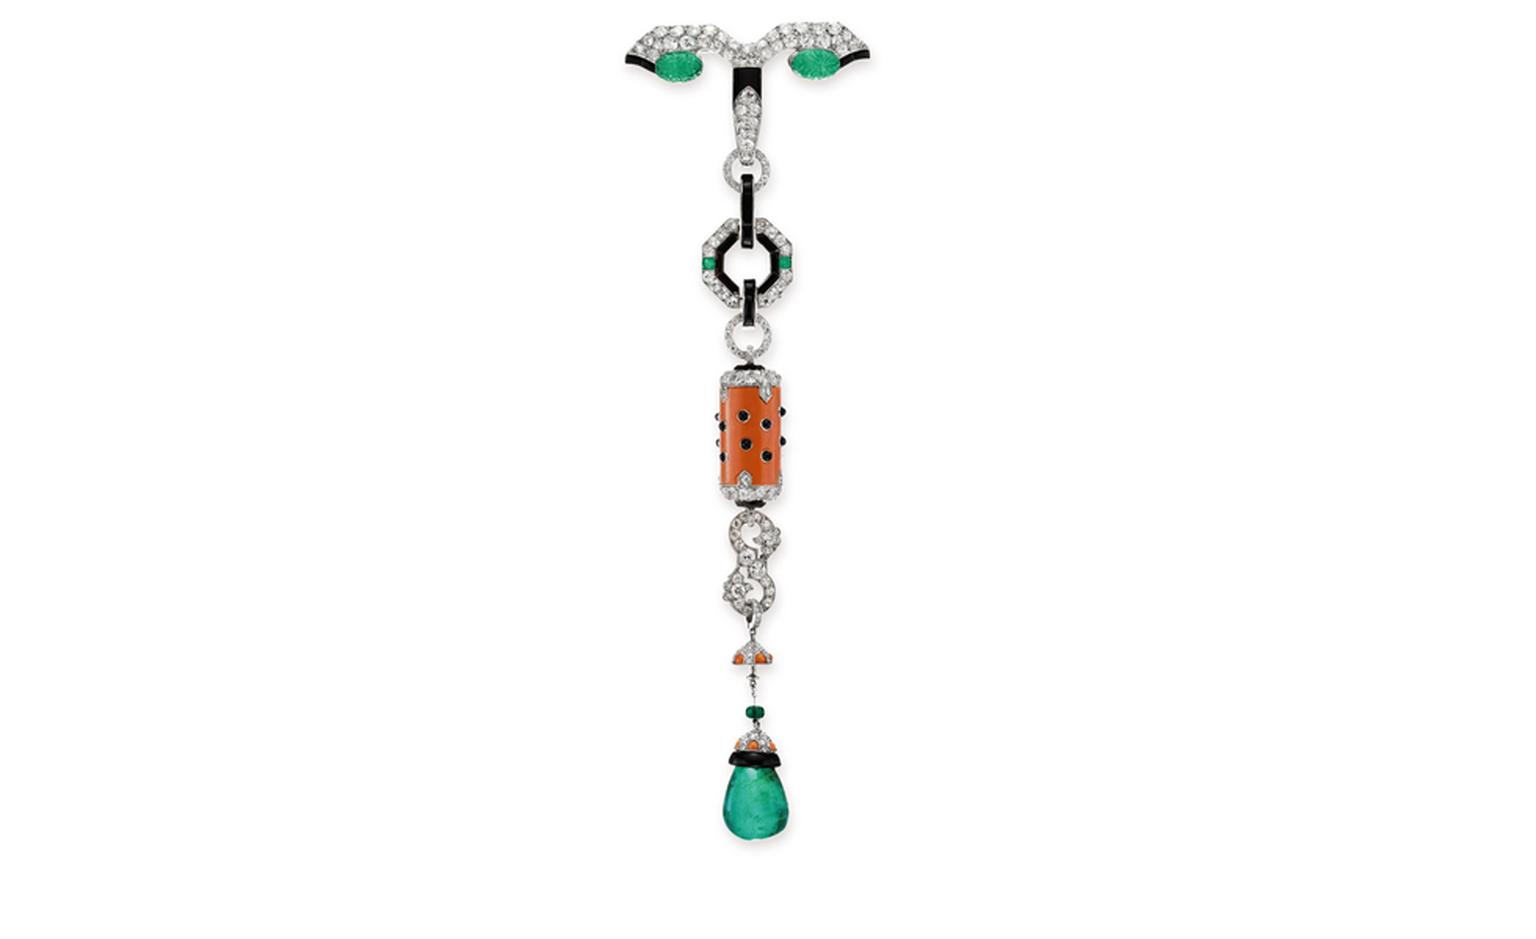 Lot 277, AN ART DECO DIAMOND, EMERALD, CORAL AND ONYX "PENDELOQUE" PENDANT BROOCH, BY CARTIER. Estimate $100,000 - 150,000 U.S. dollars. Christie's Images Ltd. SOLD FOR $158,500